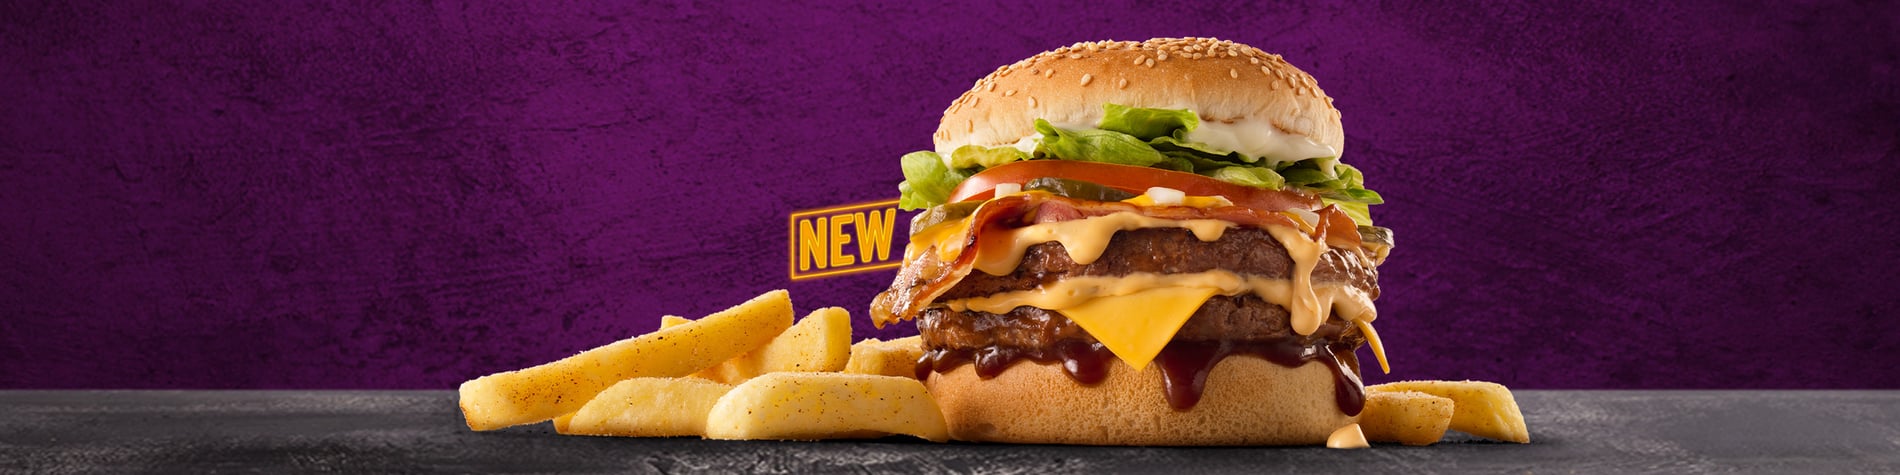 Got Cheese King Steer® Burger Meal with a cheeseburger and chips against a purple background.